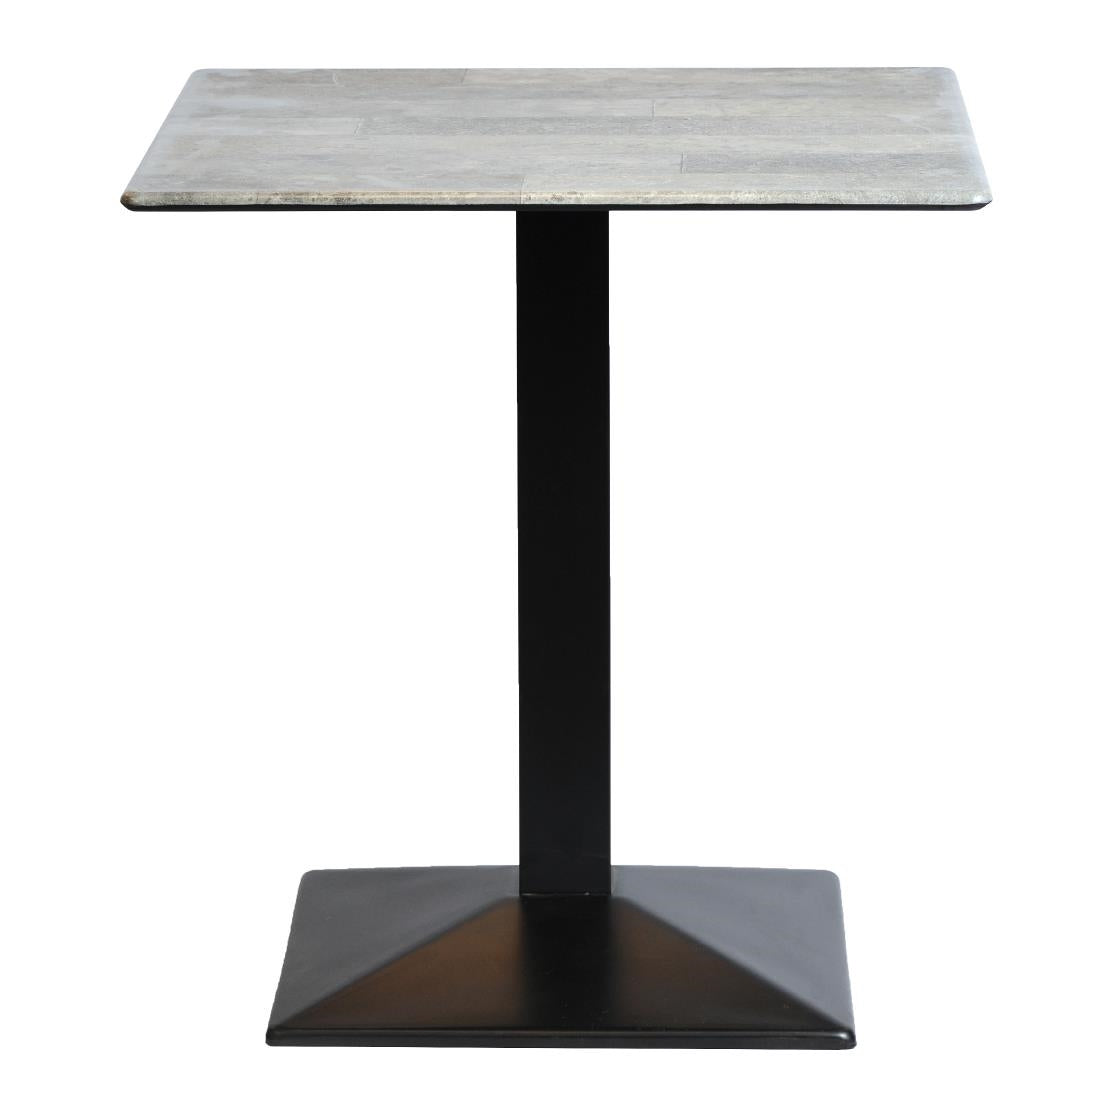 CZ815 Turin Metal Base Square Dining Table with Laminate Top Concrete 700mm JD Catering Equipment Solutions Ltd